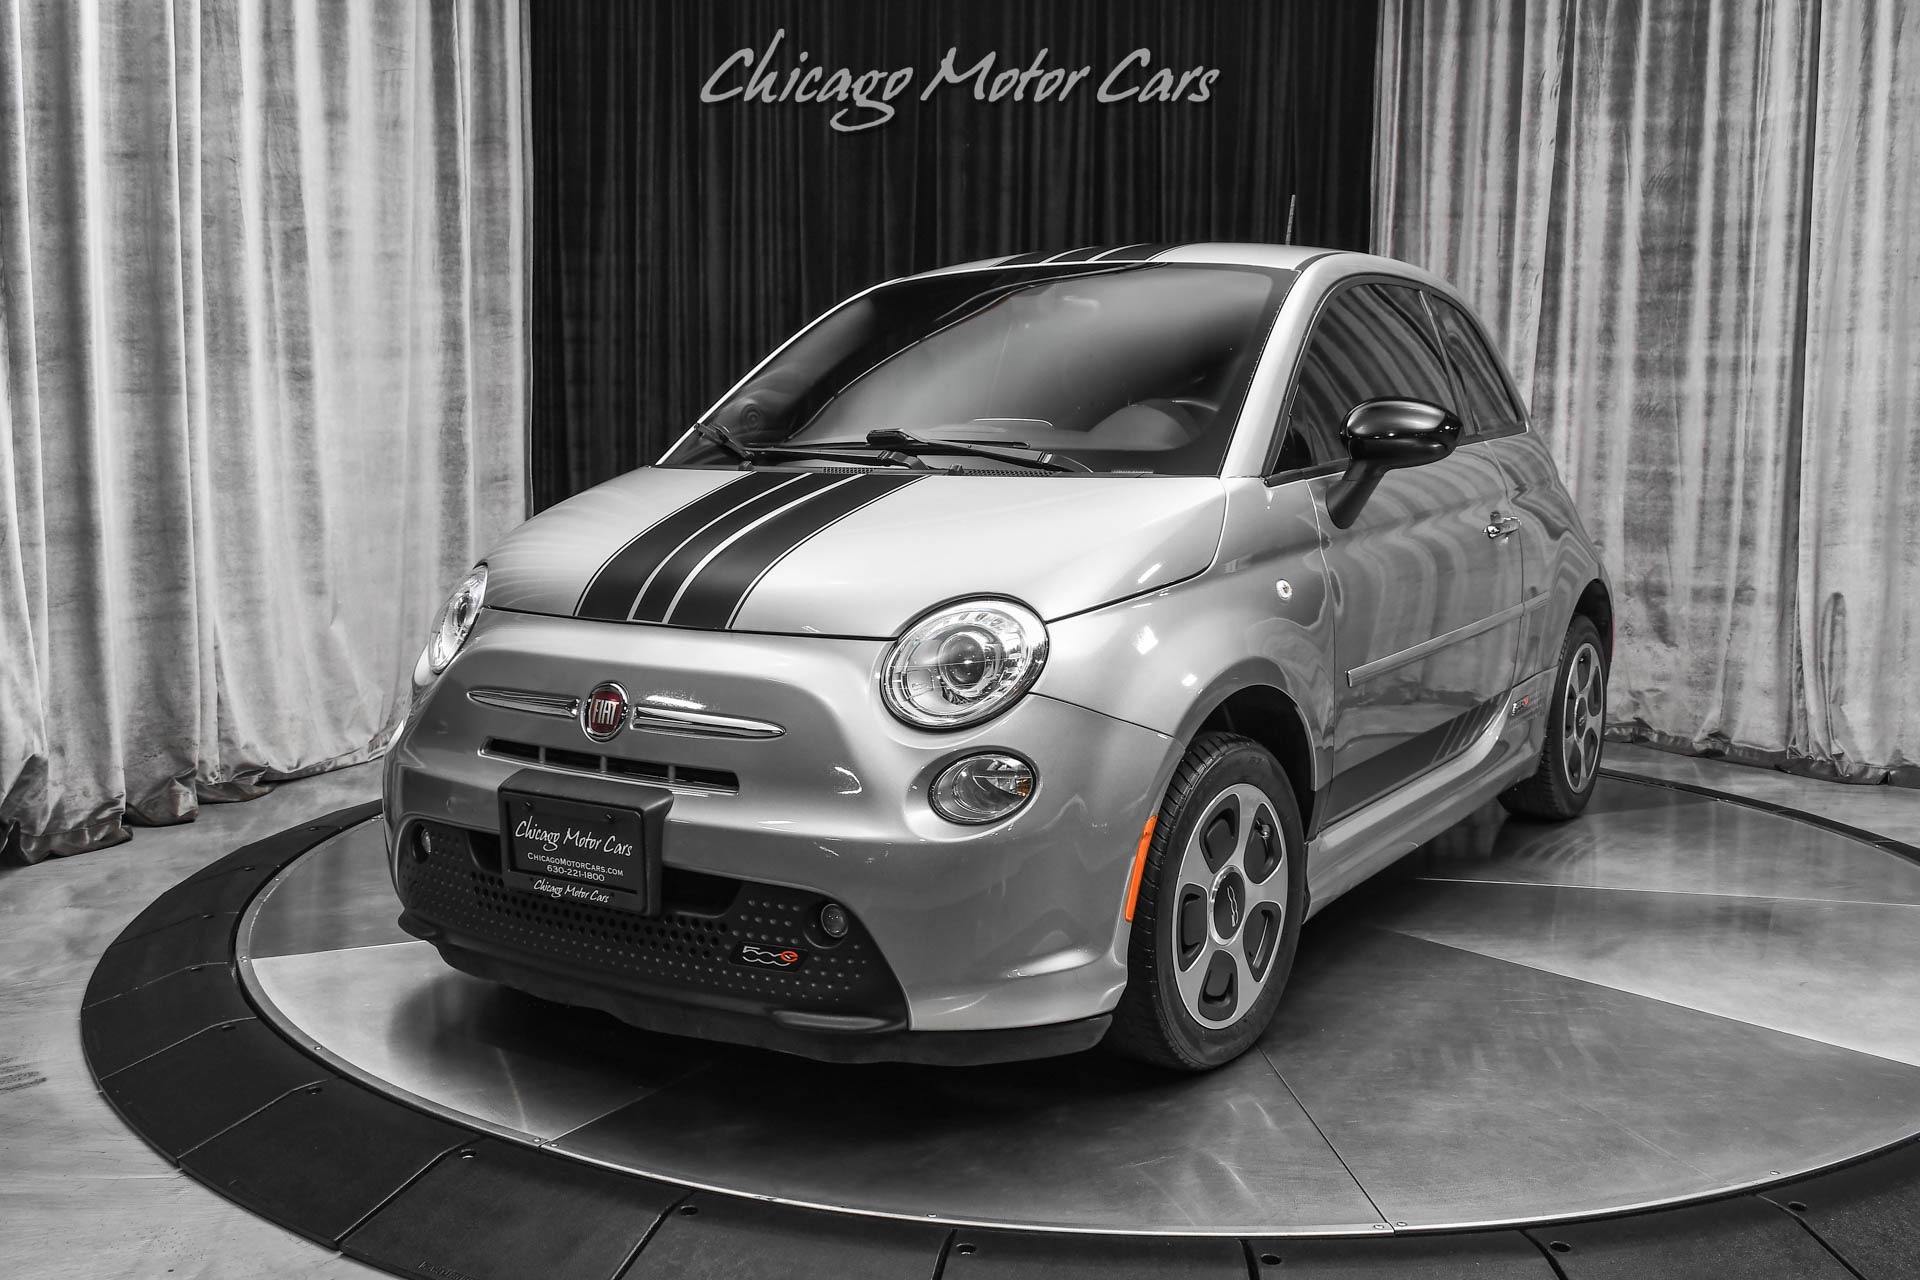 Used-2016-FIAT-500e-Hatchback-FULLY-ELECTRIC-Heated-Front-Seats-Navigation-ONLY-24K-Miles